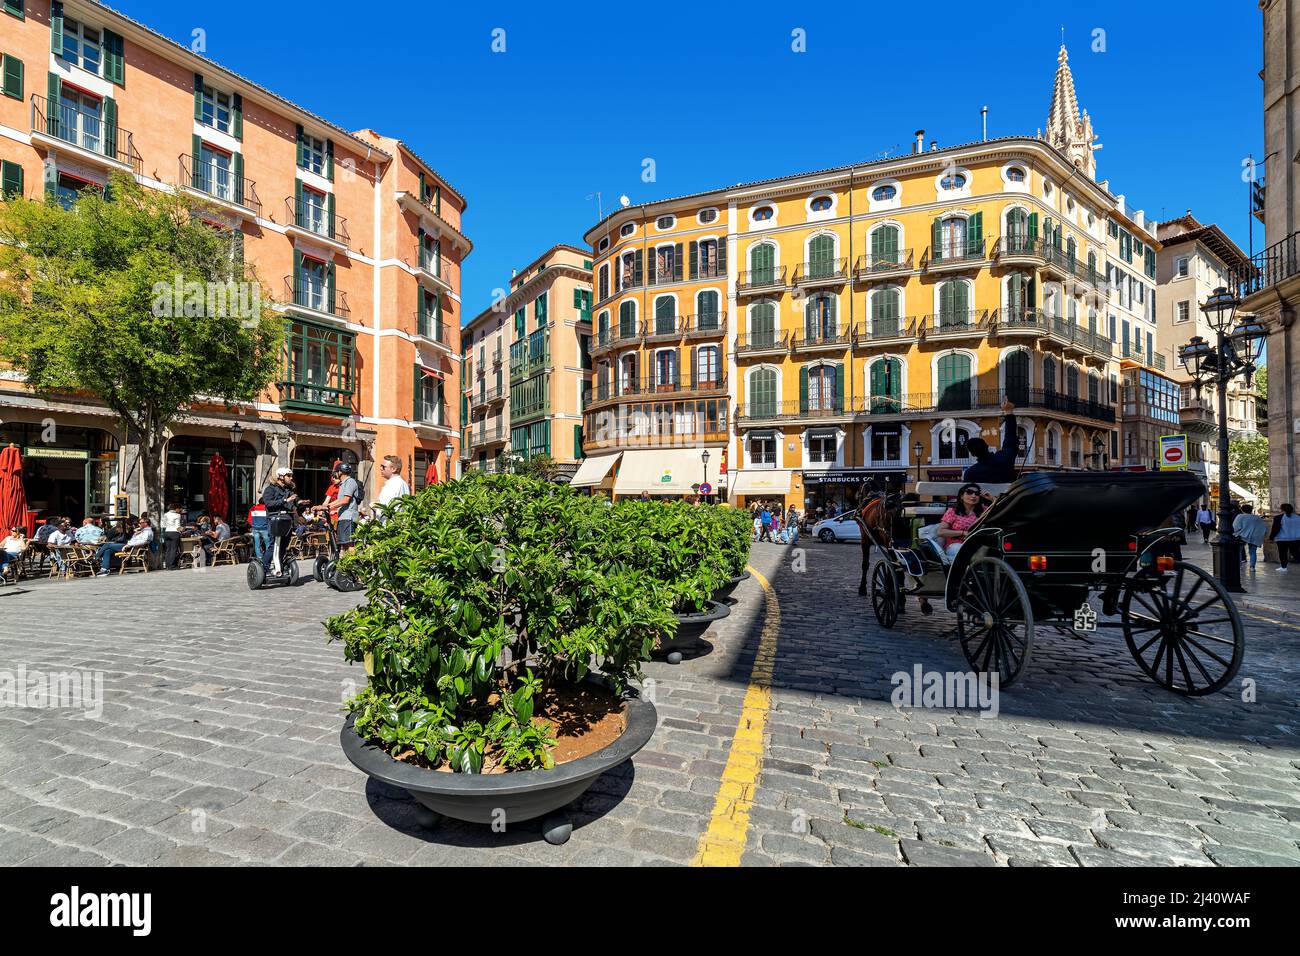 People and horse-drawn carriage on cobblestone street among colorful buildings in historic part of Palma, Spain. Stock Photo